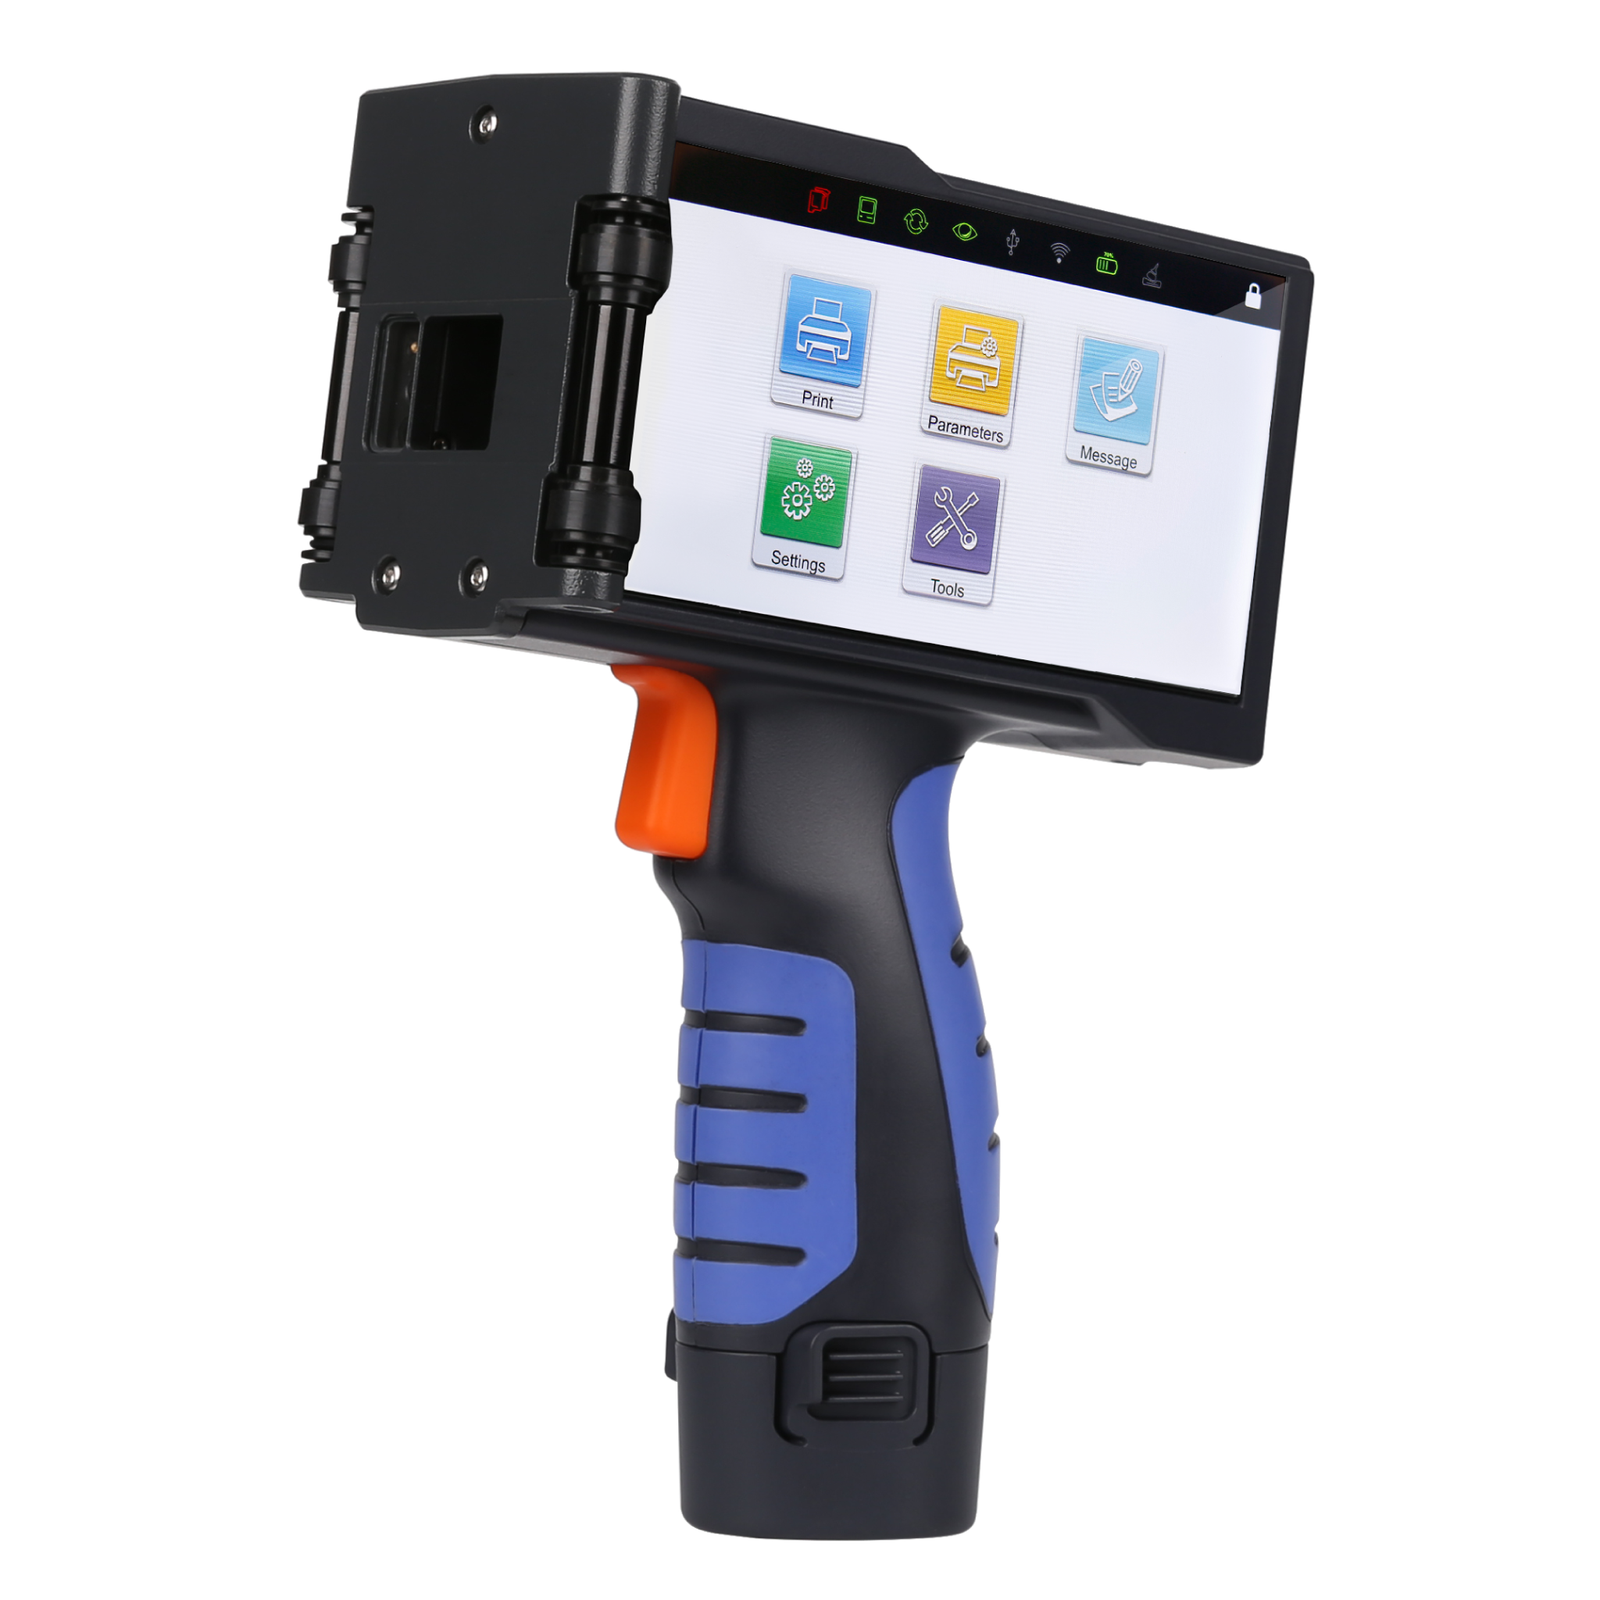 Showing the  JORESTECH TIJ handheld inkjet coder with digital control panel turned on over white background